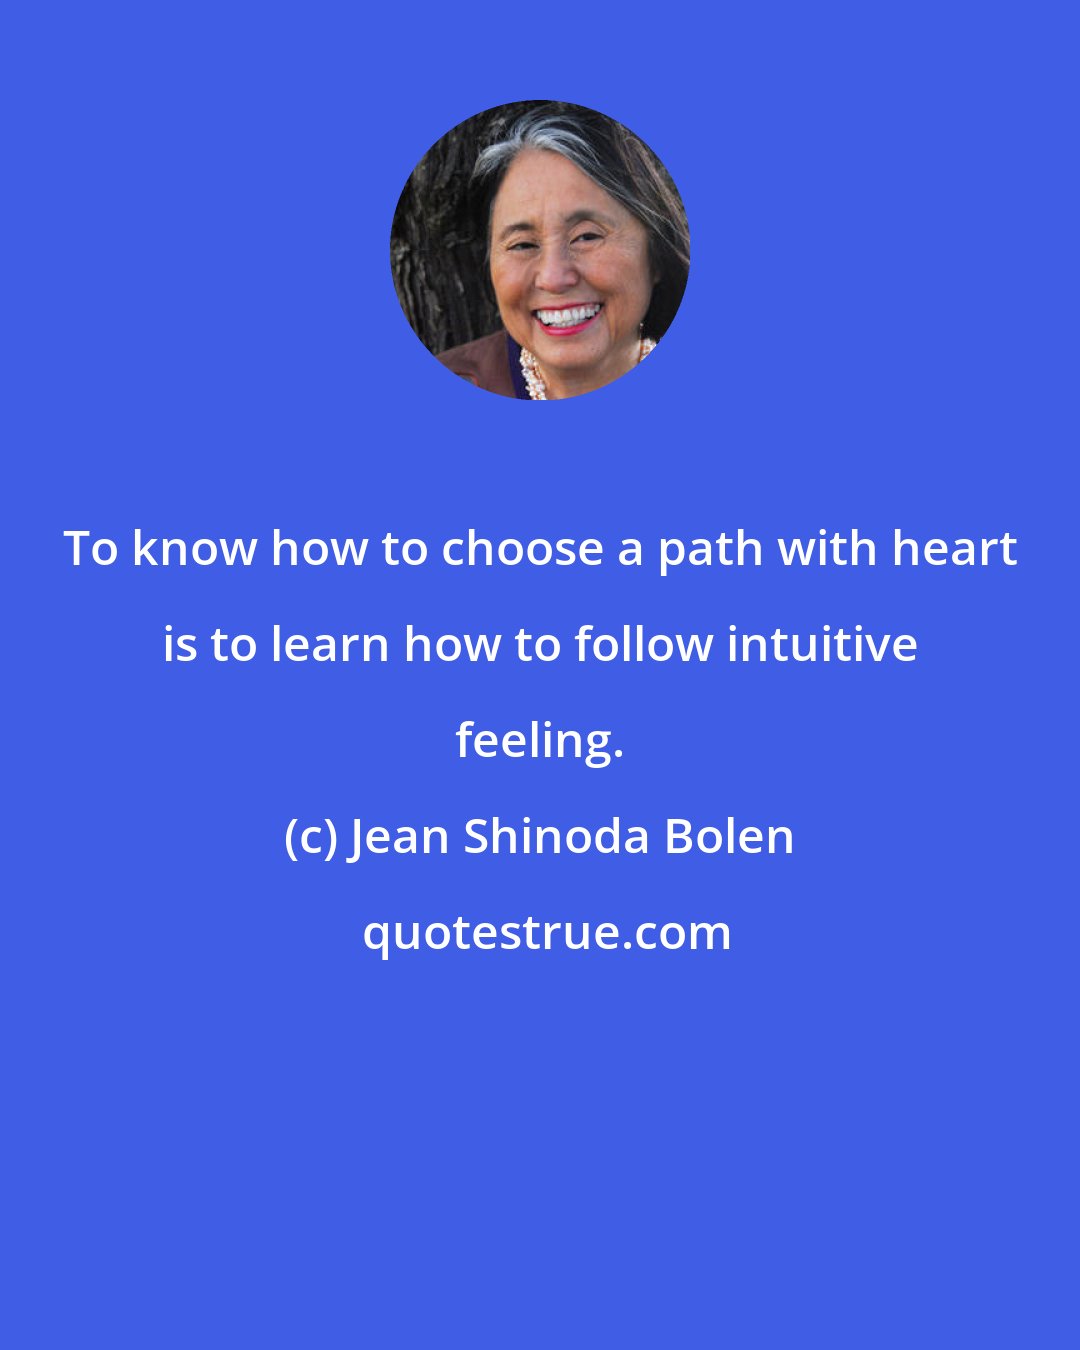 Jean Shinoda Bolen: To know how to choose a path with heart is to learn how to follow intuitive feeling.